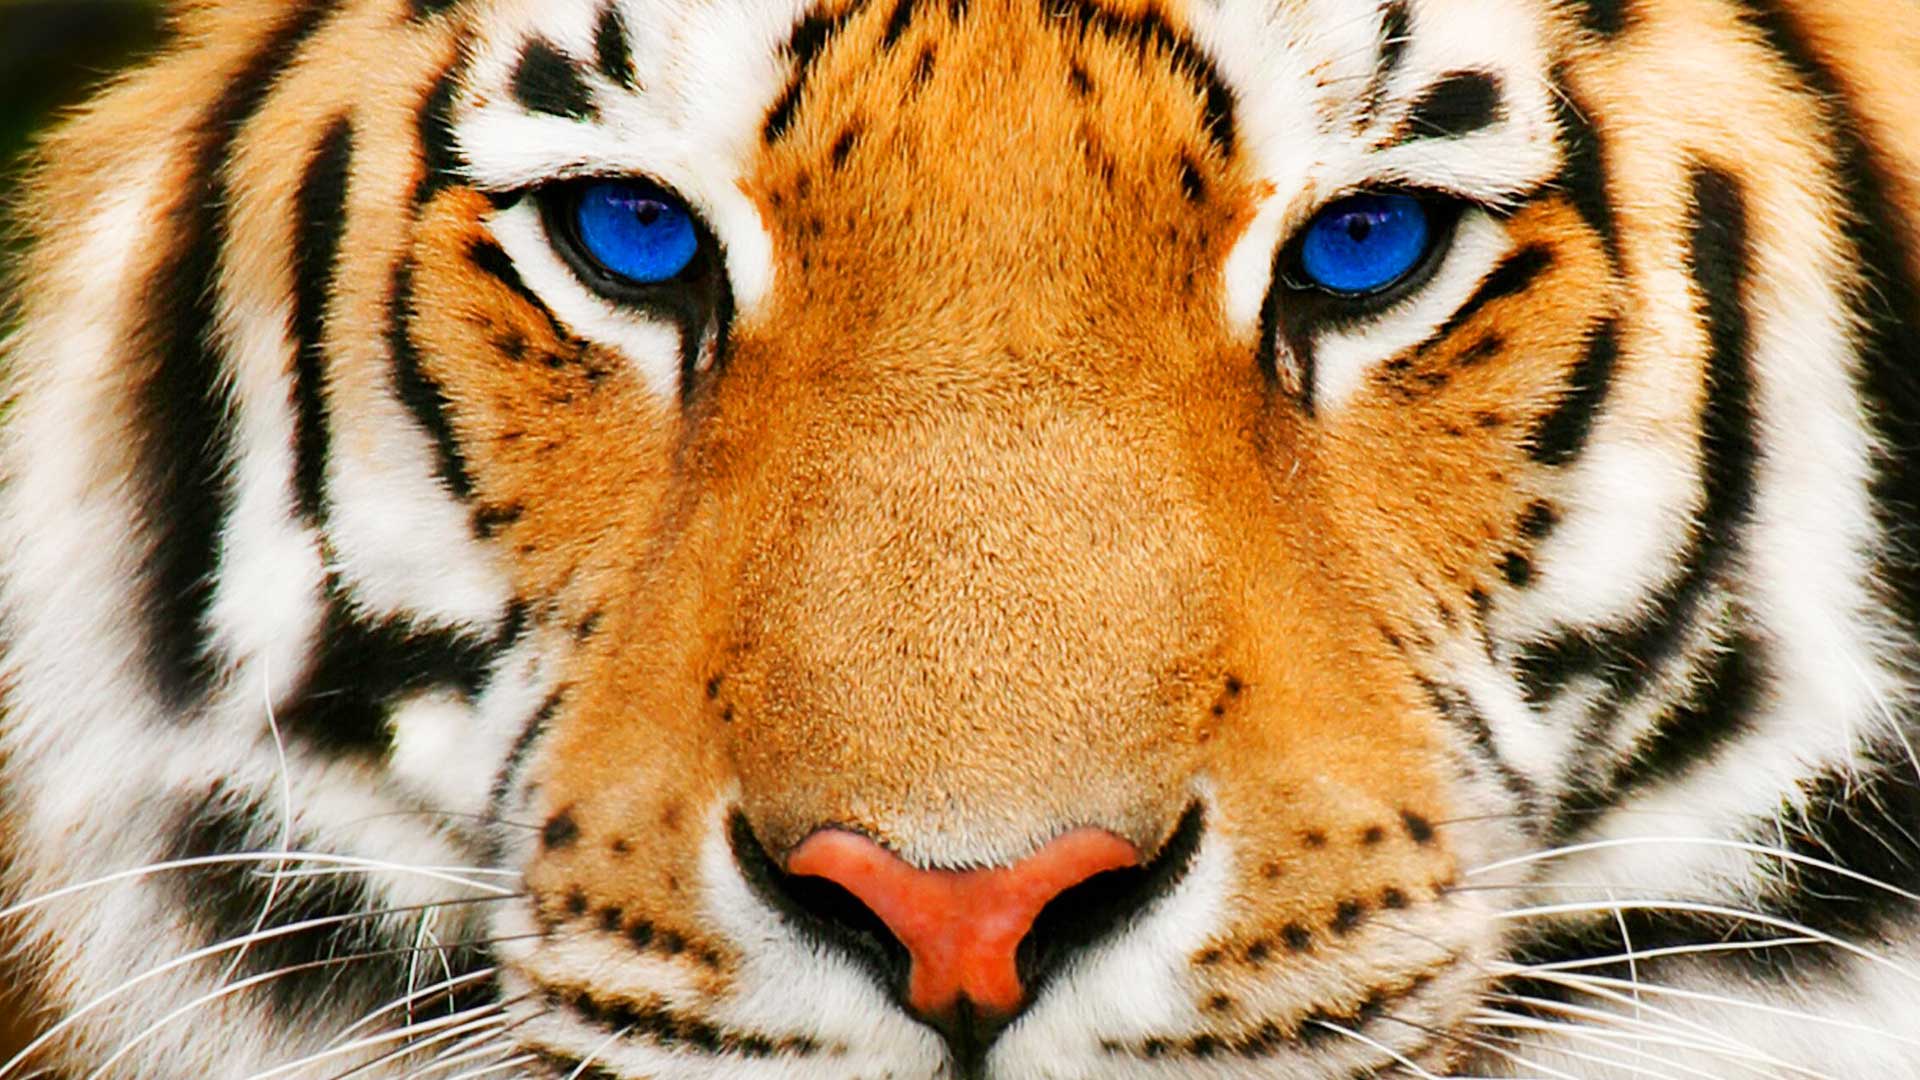 Tiger HD Wallpapers Tiger Pictures Free Download 1080p